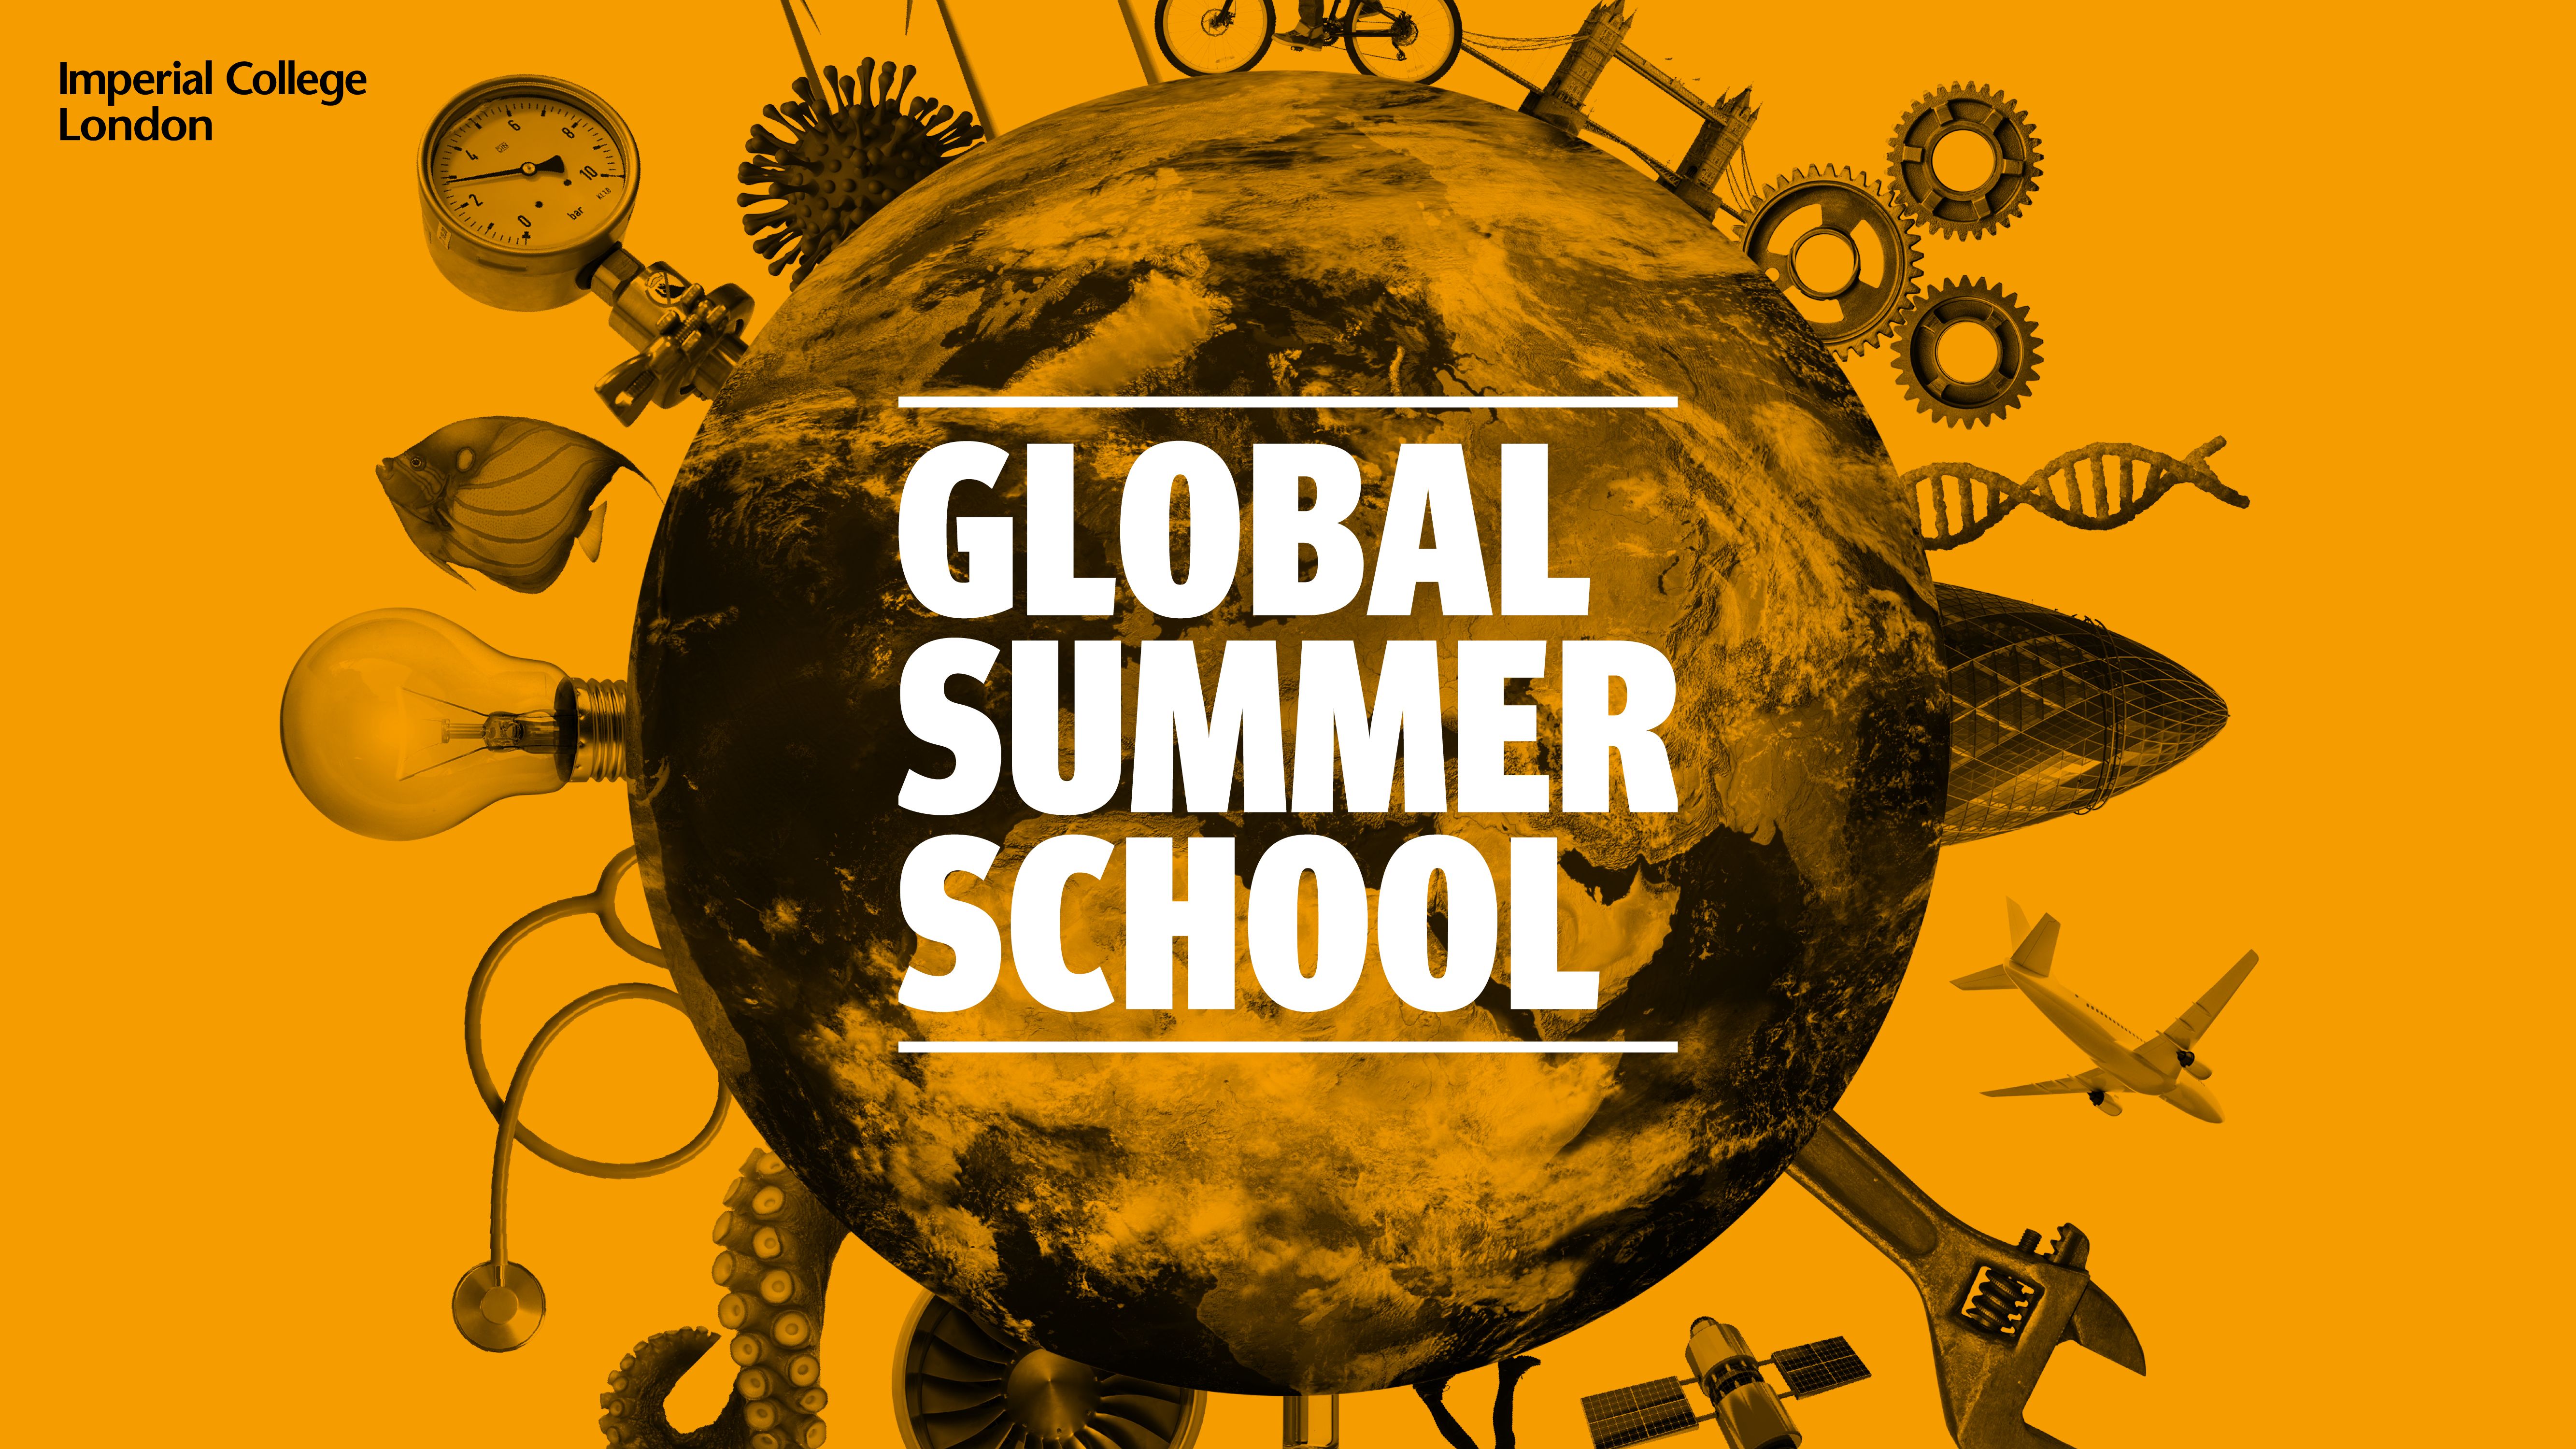 About Global Summer School